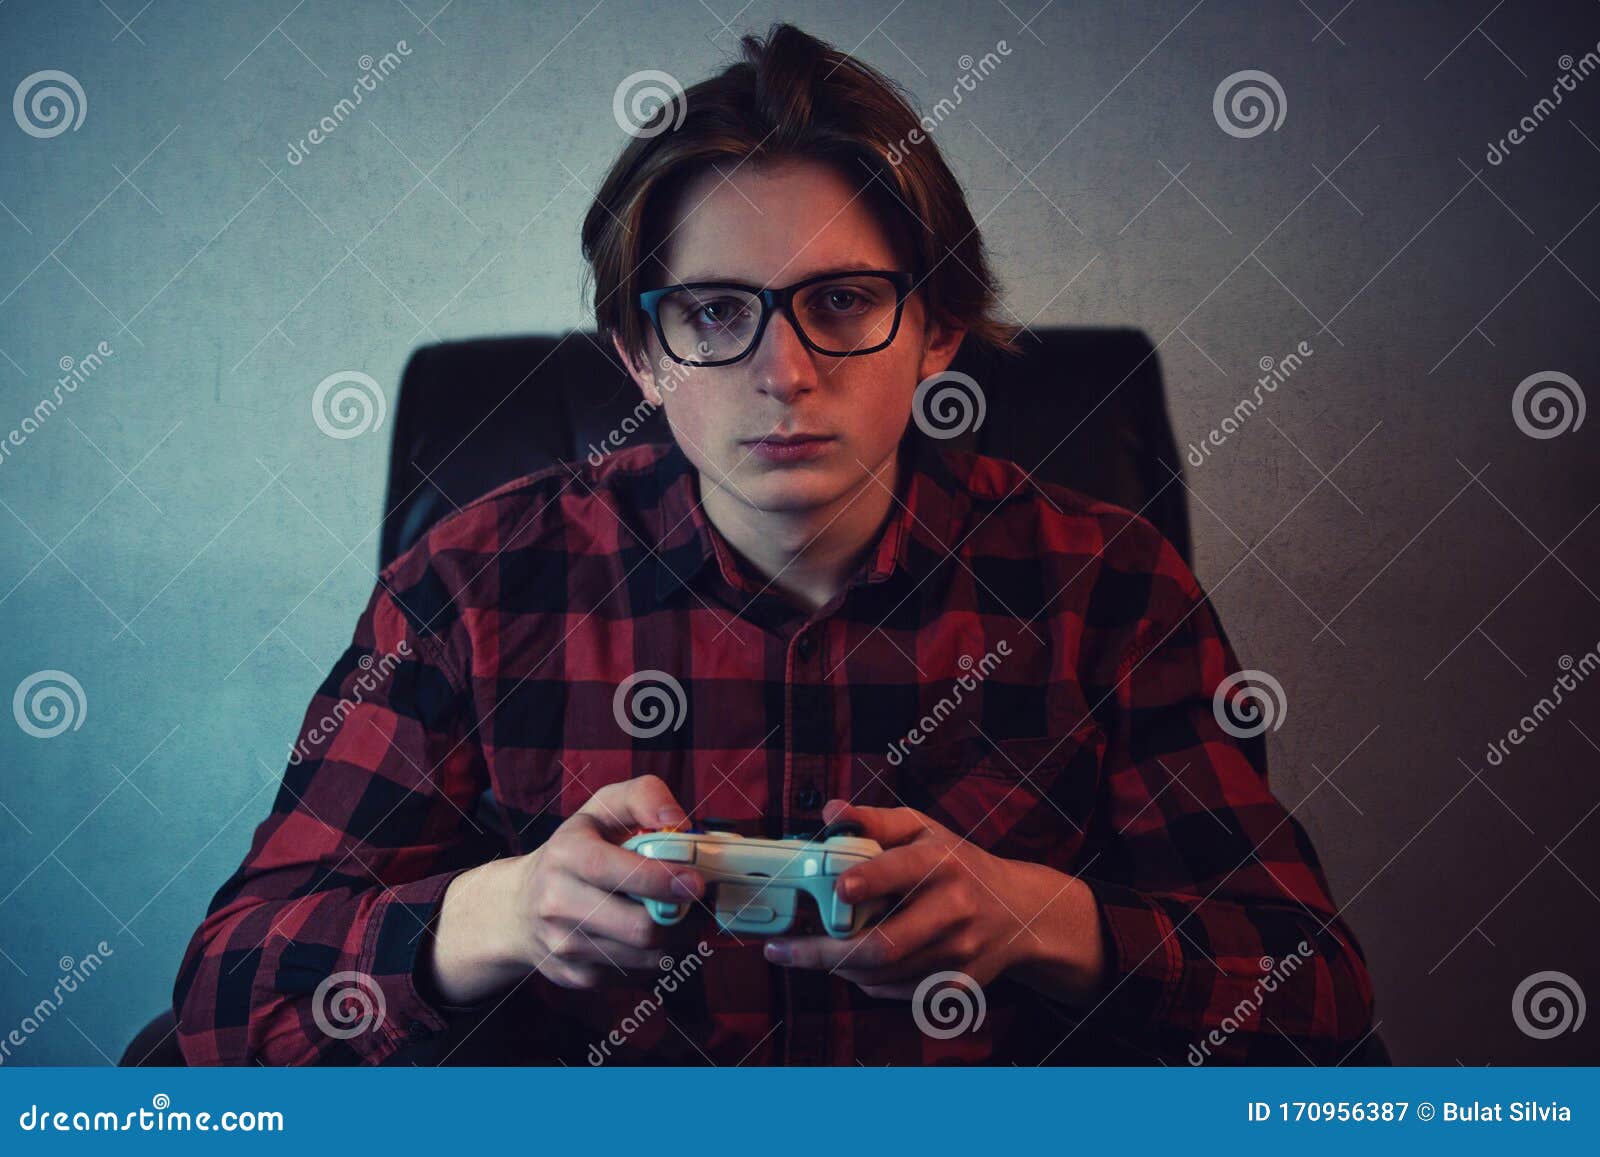 serious adolescent boy playing video games late night seated in armchair inside a dark room background. intent teen guy holding a